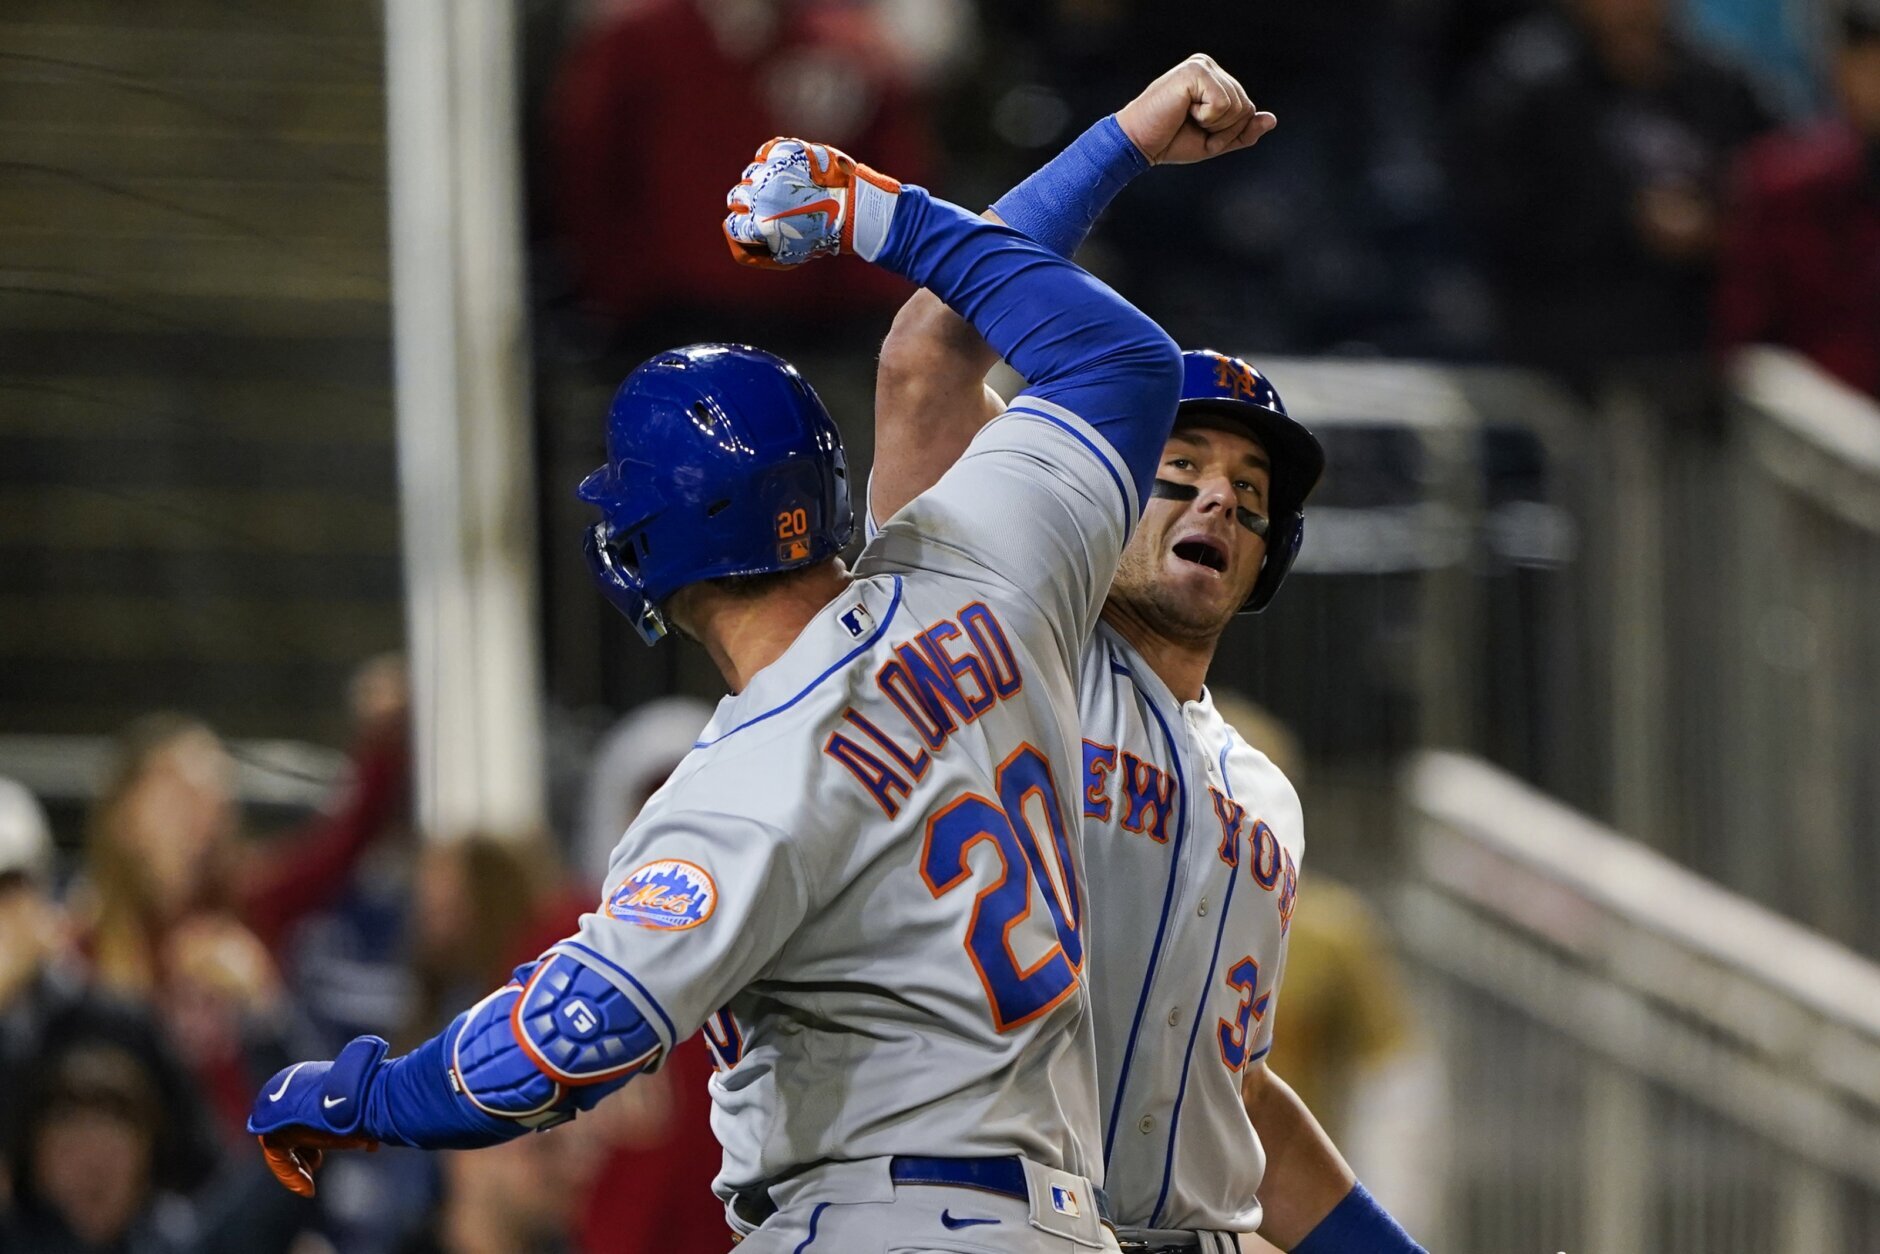 Plant High's Pete Alonso is slugging his way into baseball history and the  hearts of Mets fans